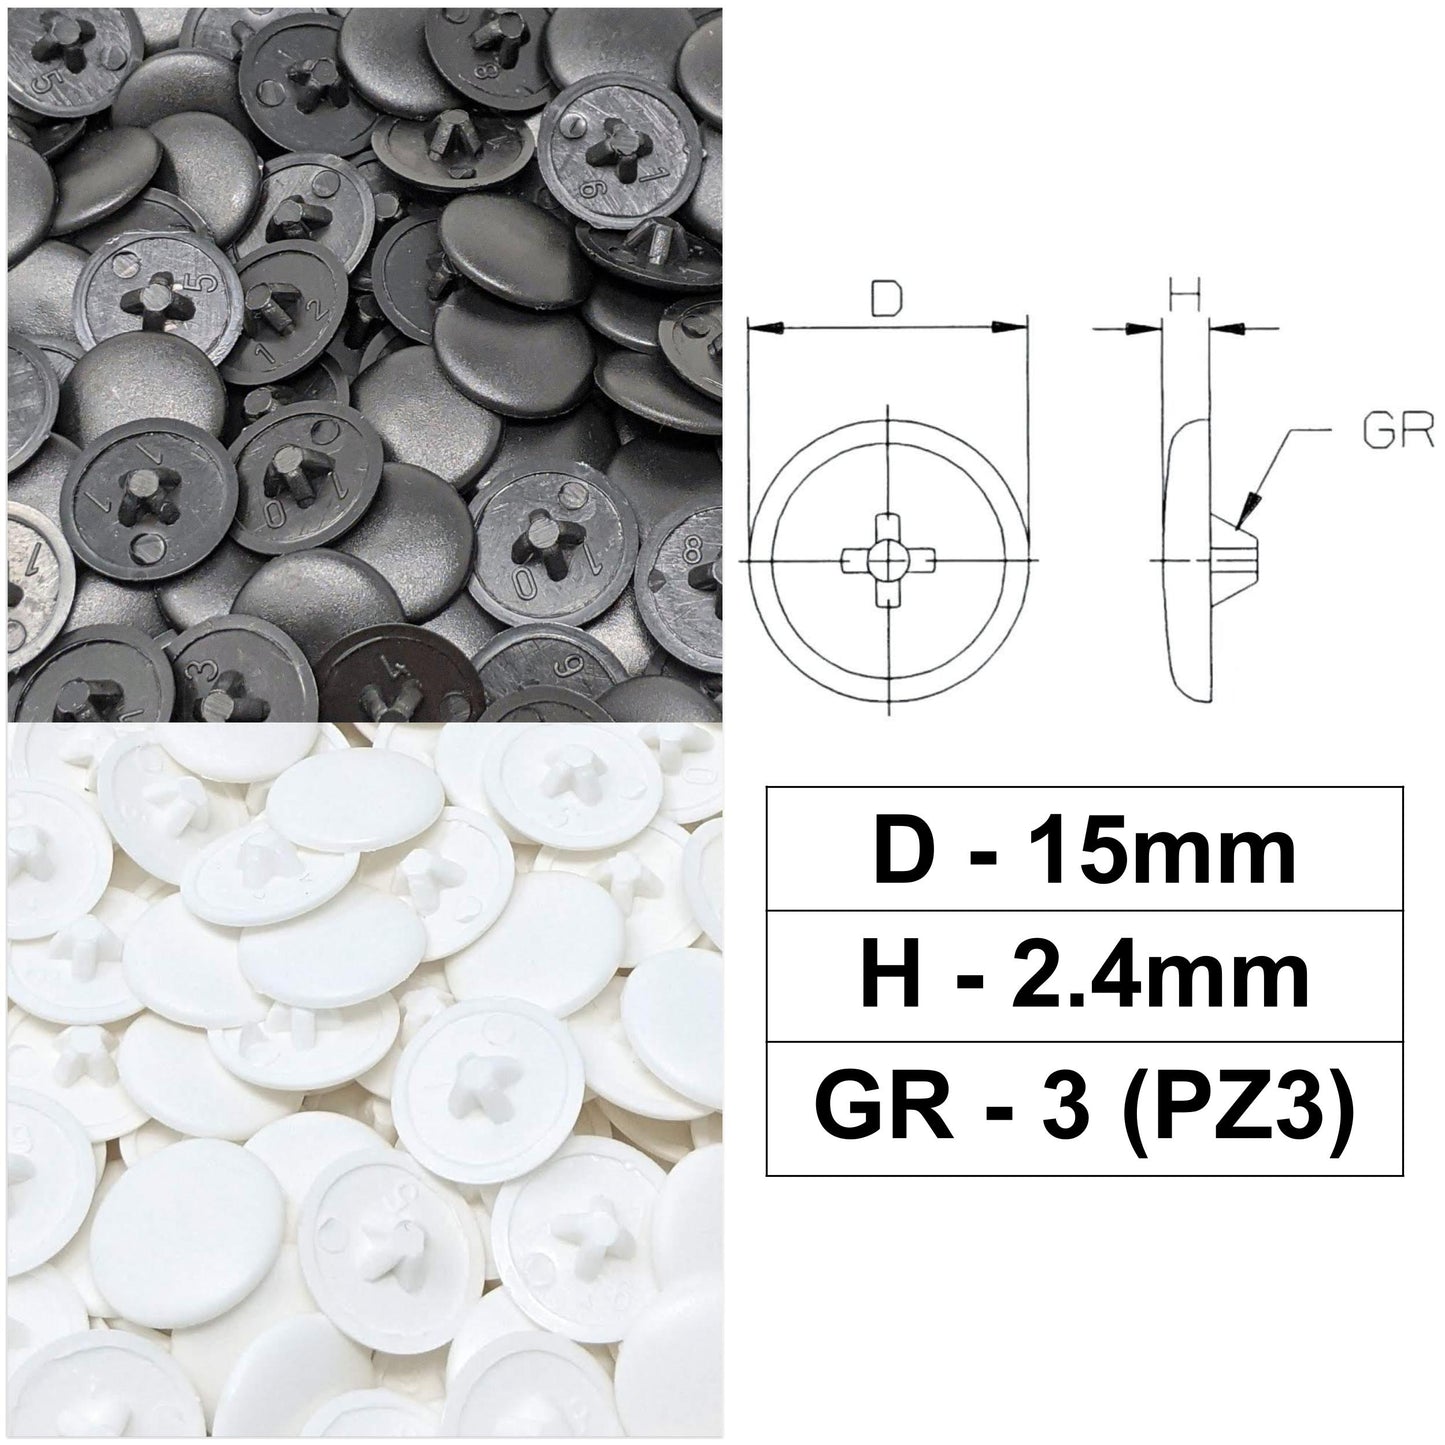 PZ3 Pozi Screw Caps Covers (15mm x 2.4mm) | Made in Germany | Keay Vital Parts